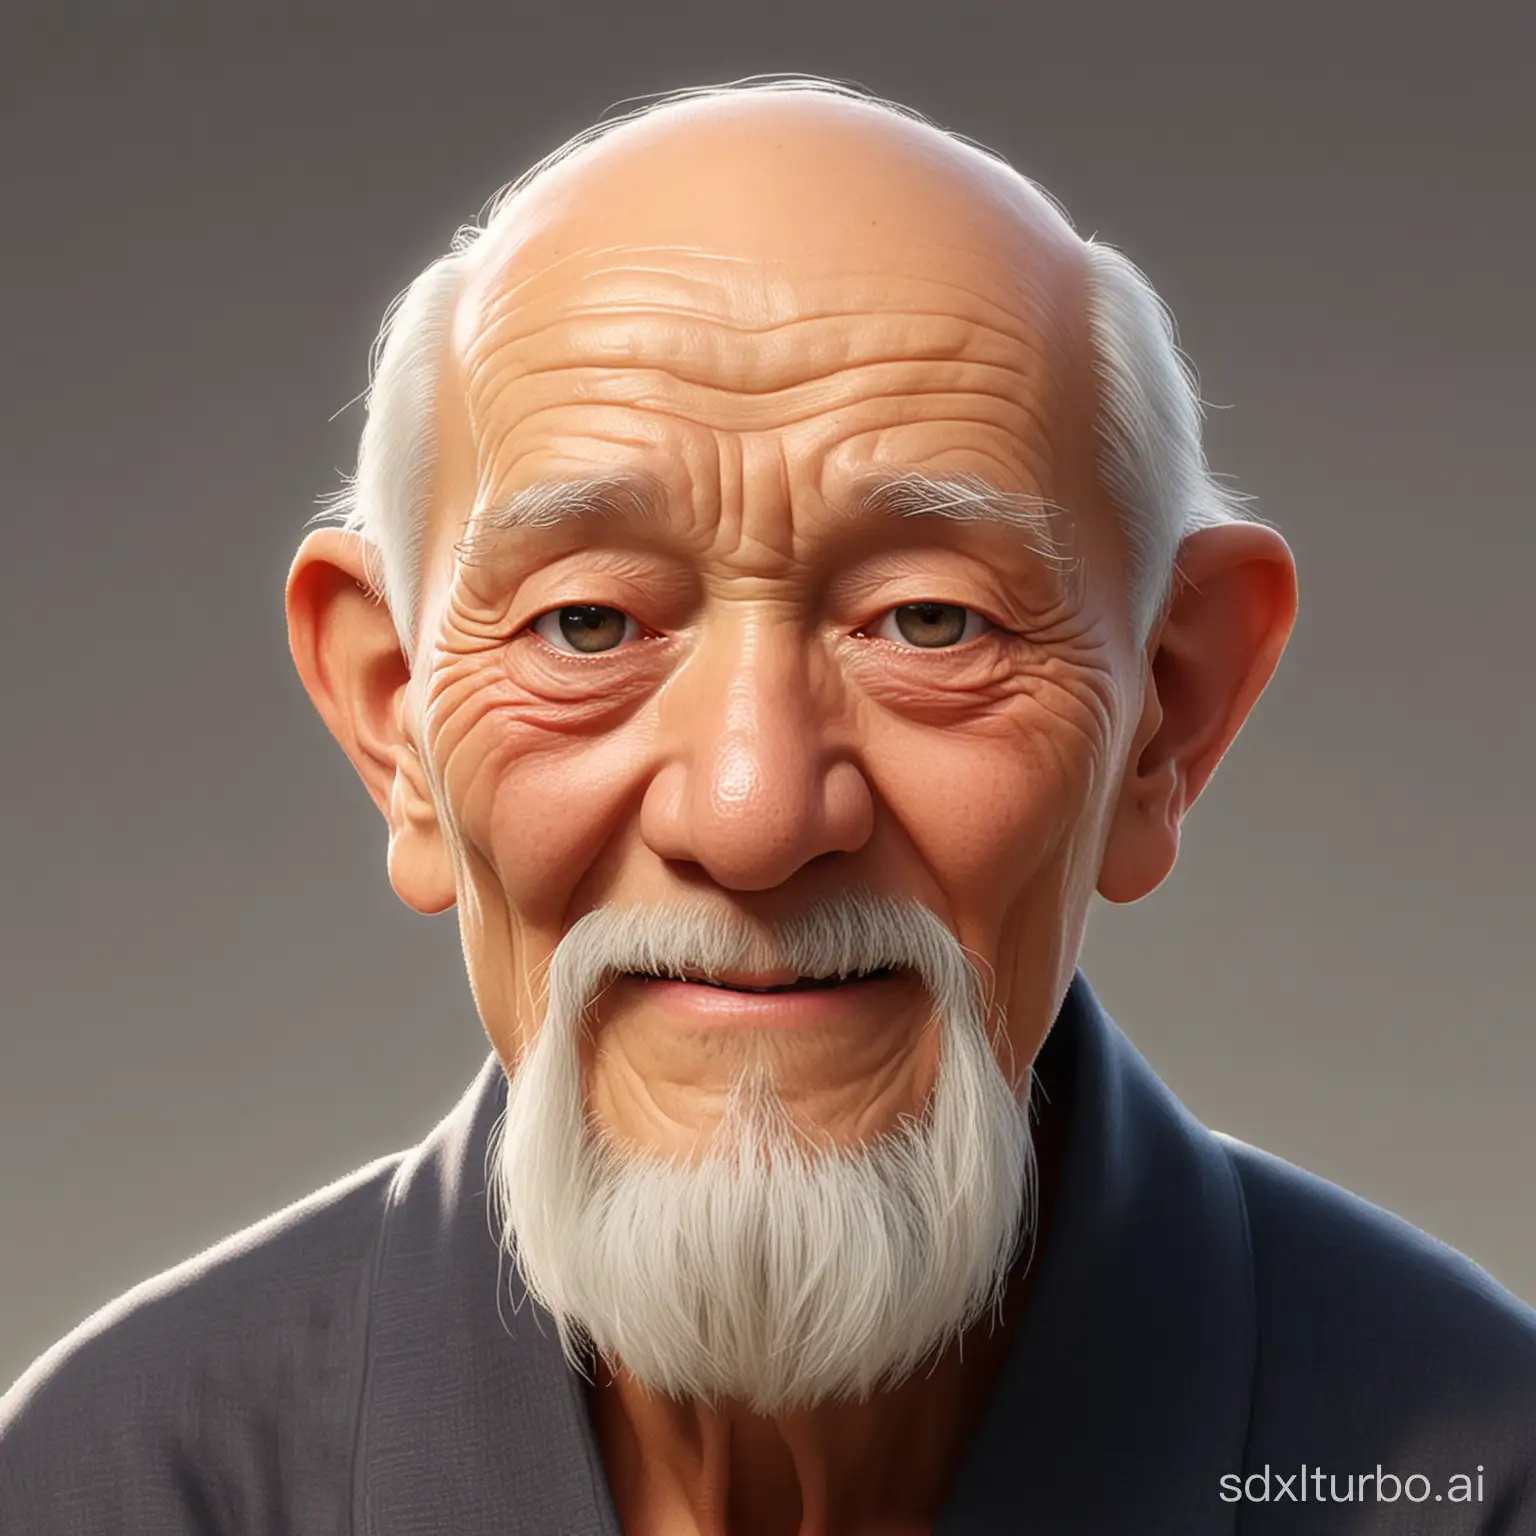 Generate a talking Chinese kind old man cartoon GIF